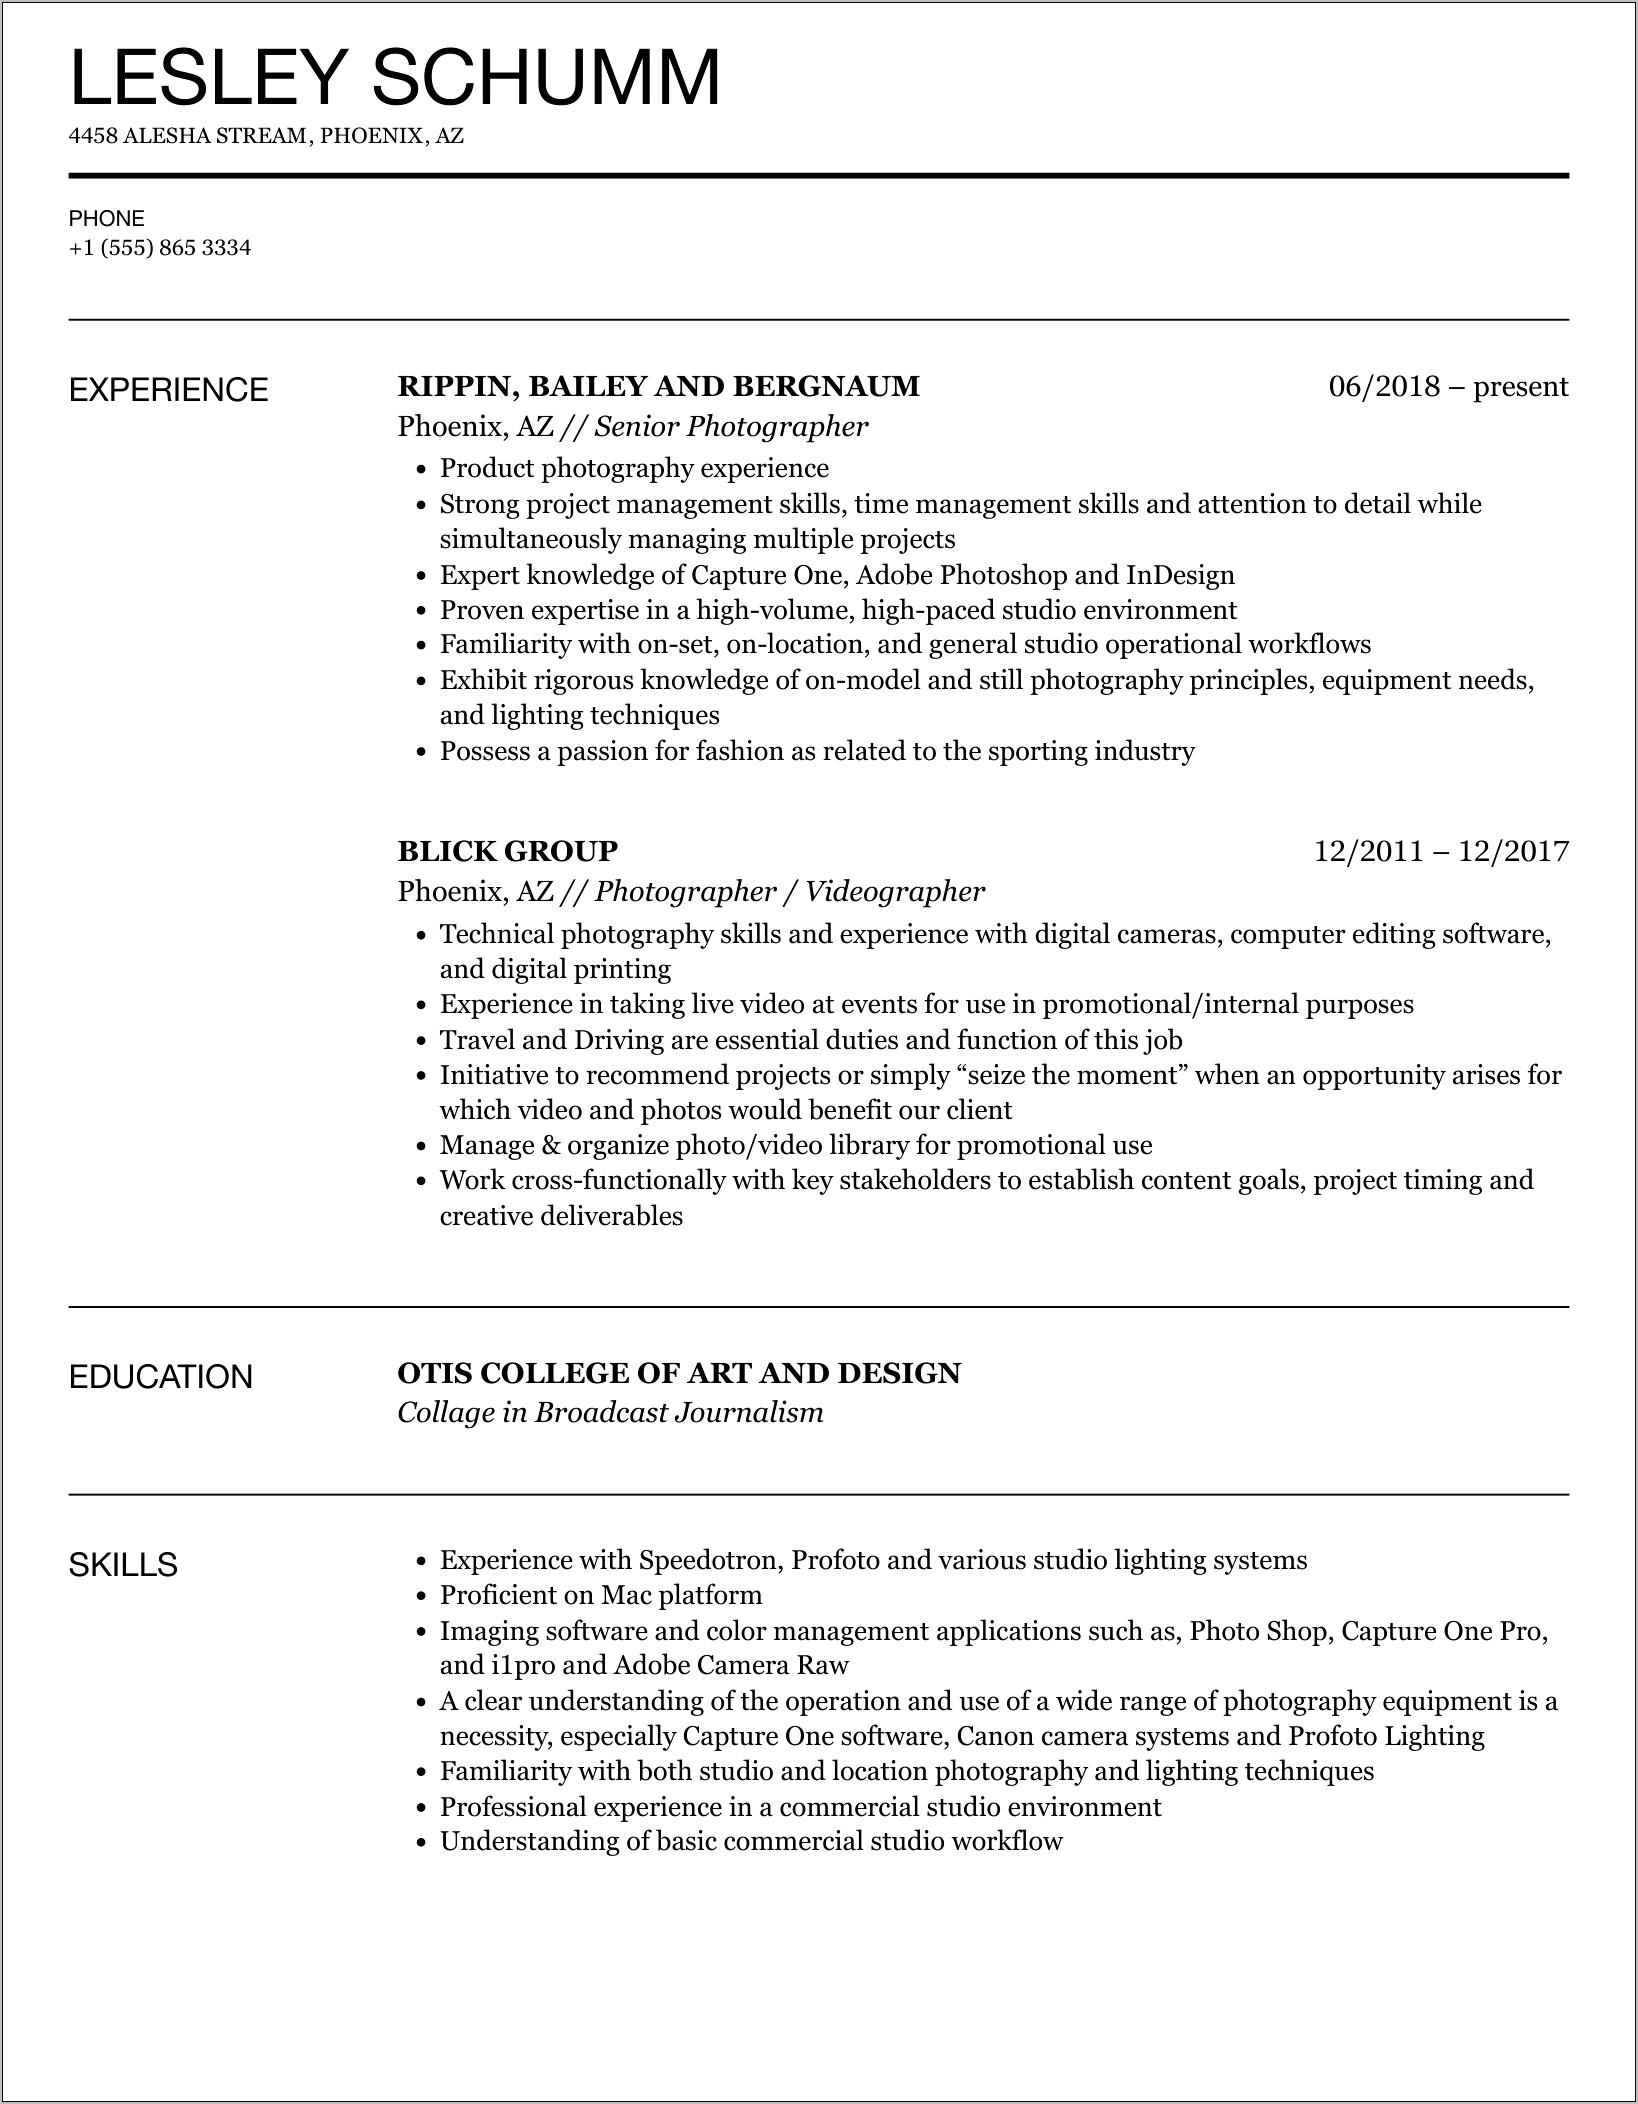 Resumes Skill Examples For Photographers